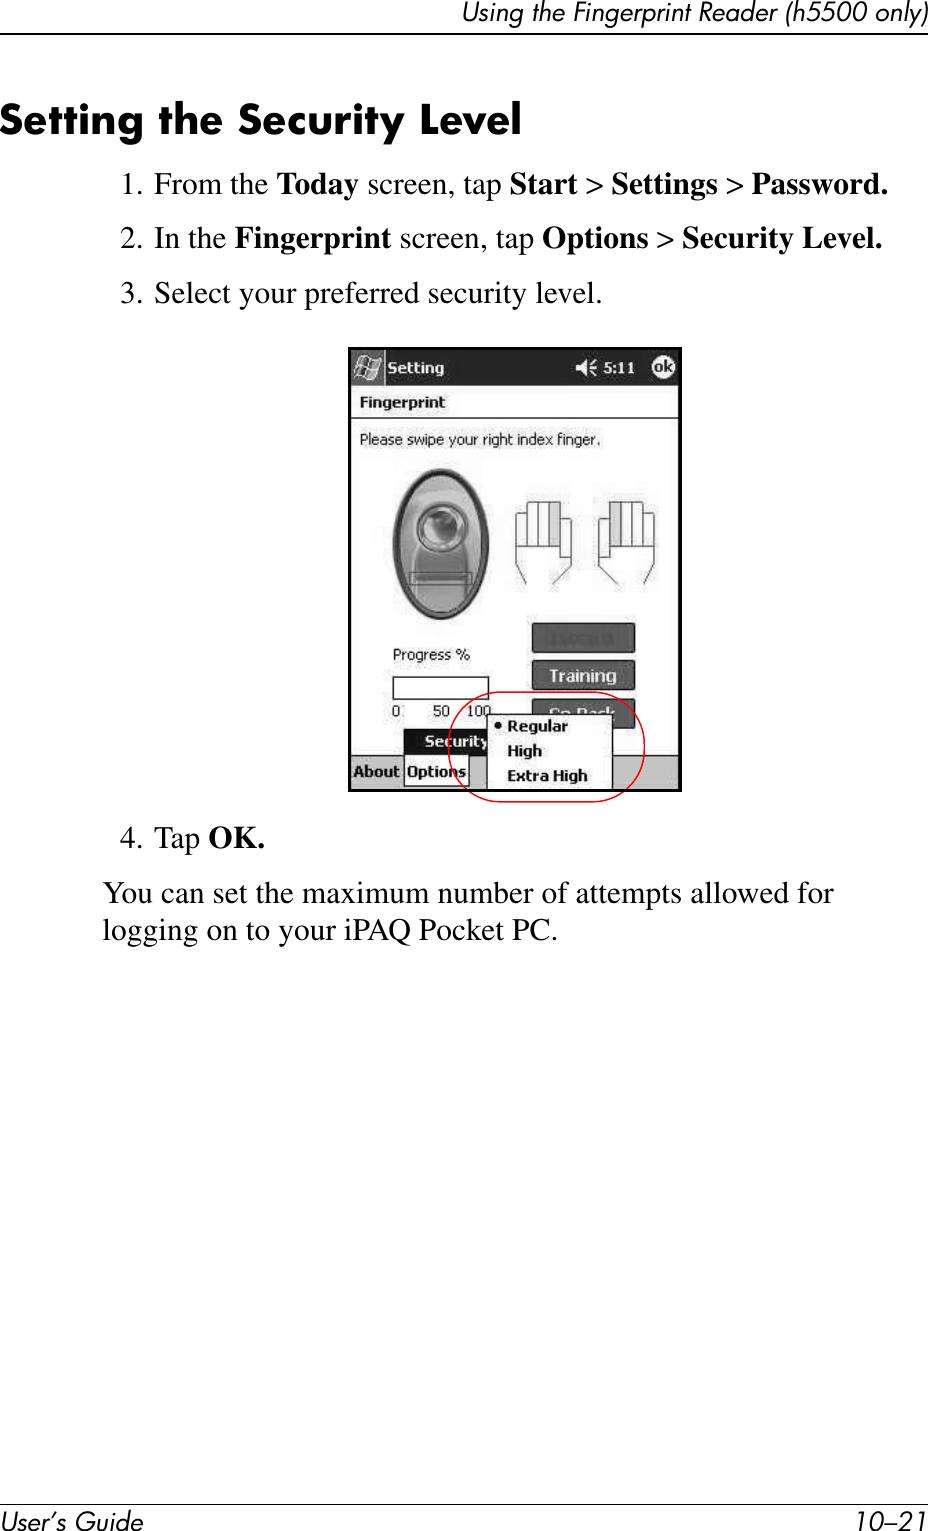 Using the Fingerprint Reader (h5500 only)User’s Guide 10–21Setting the Security Level1. From the Today screen, tap Start &gt; Settings &gt; Password.2. In the Fingerprint screen, tap Options &gt; Security Level.3. Select your preferred security level.4. Tap OK.You can set the maximum number of attempts allowed for logging on to your iPAQ Pocket PC. 